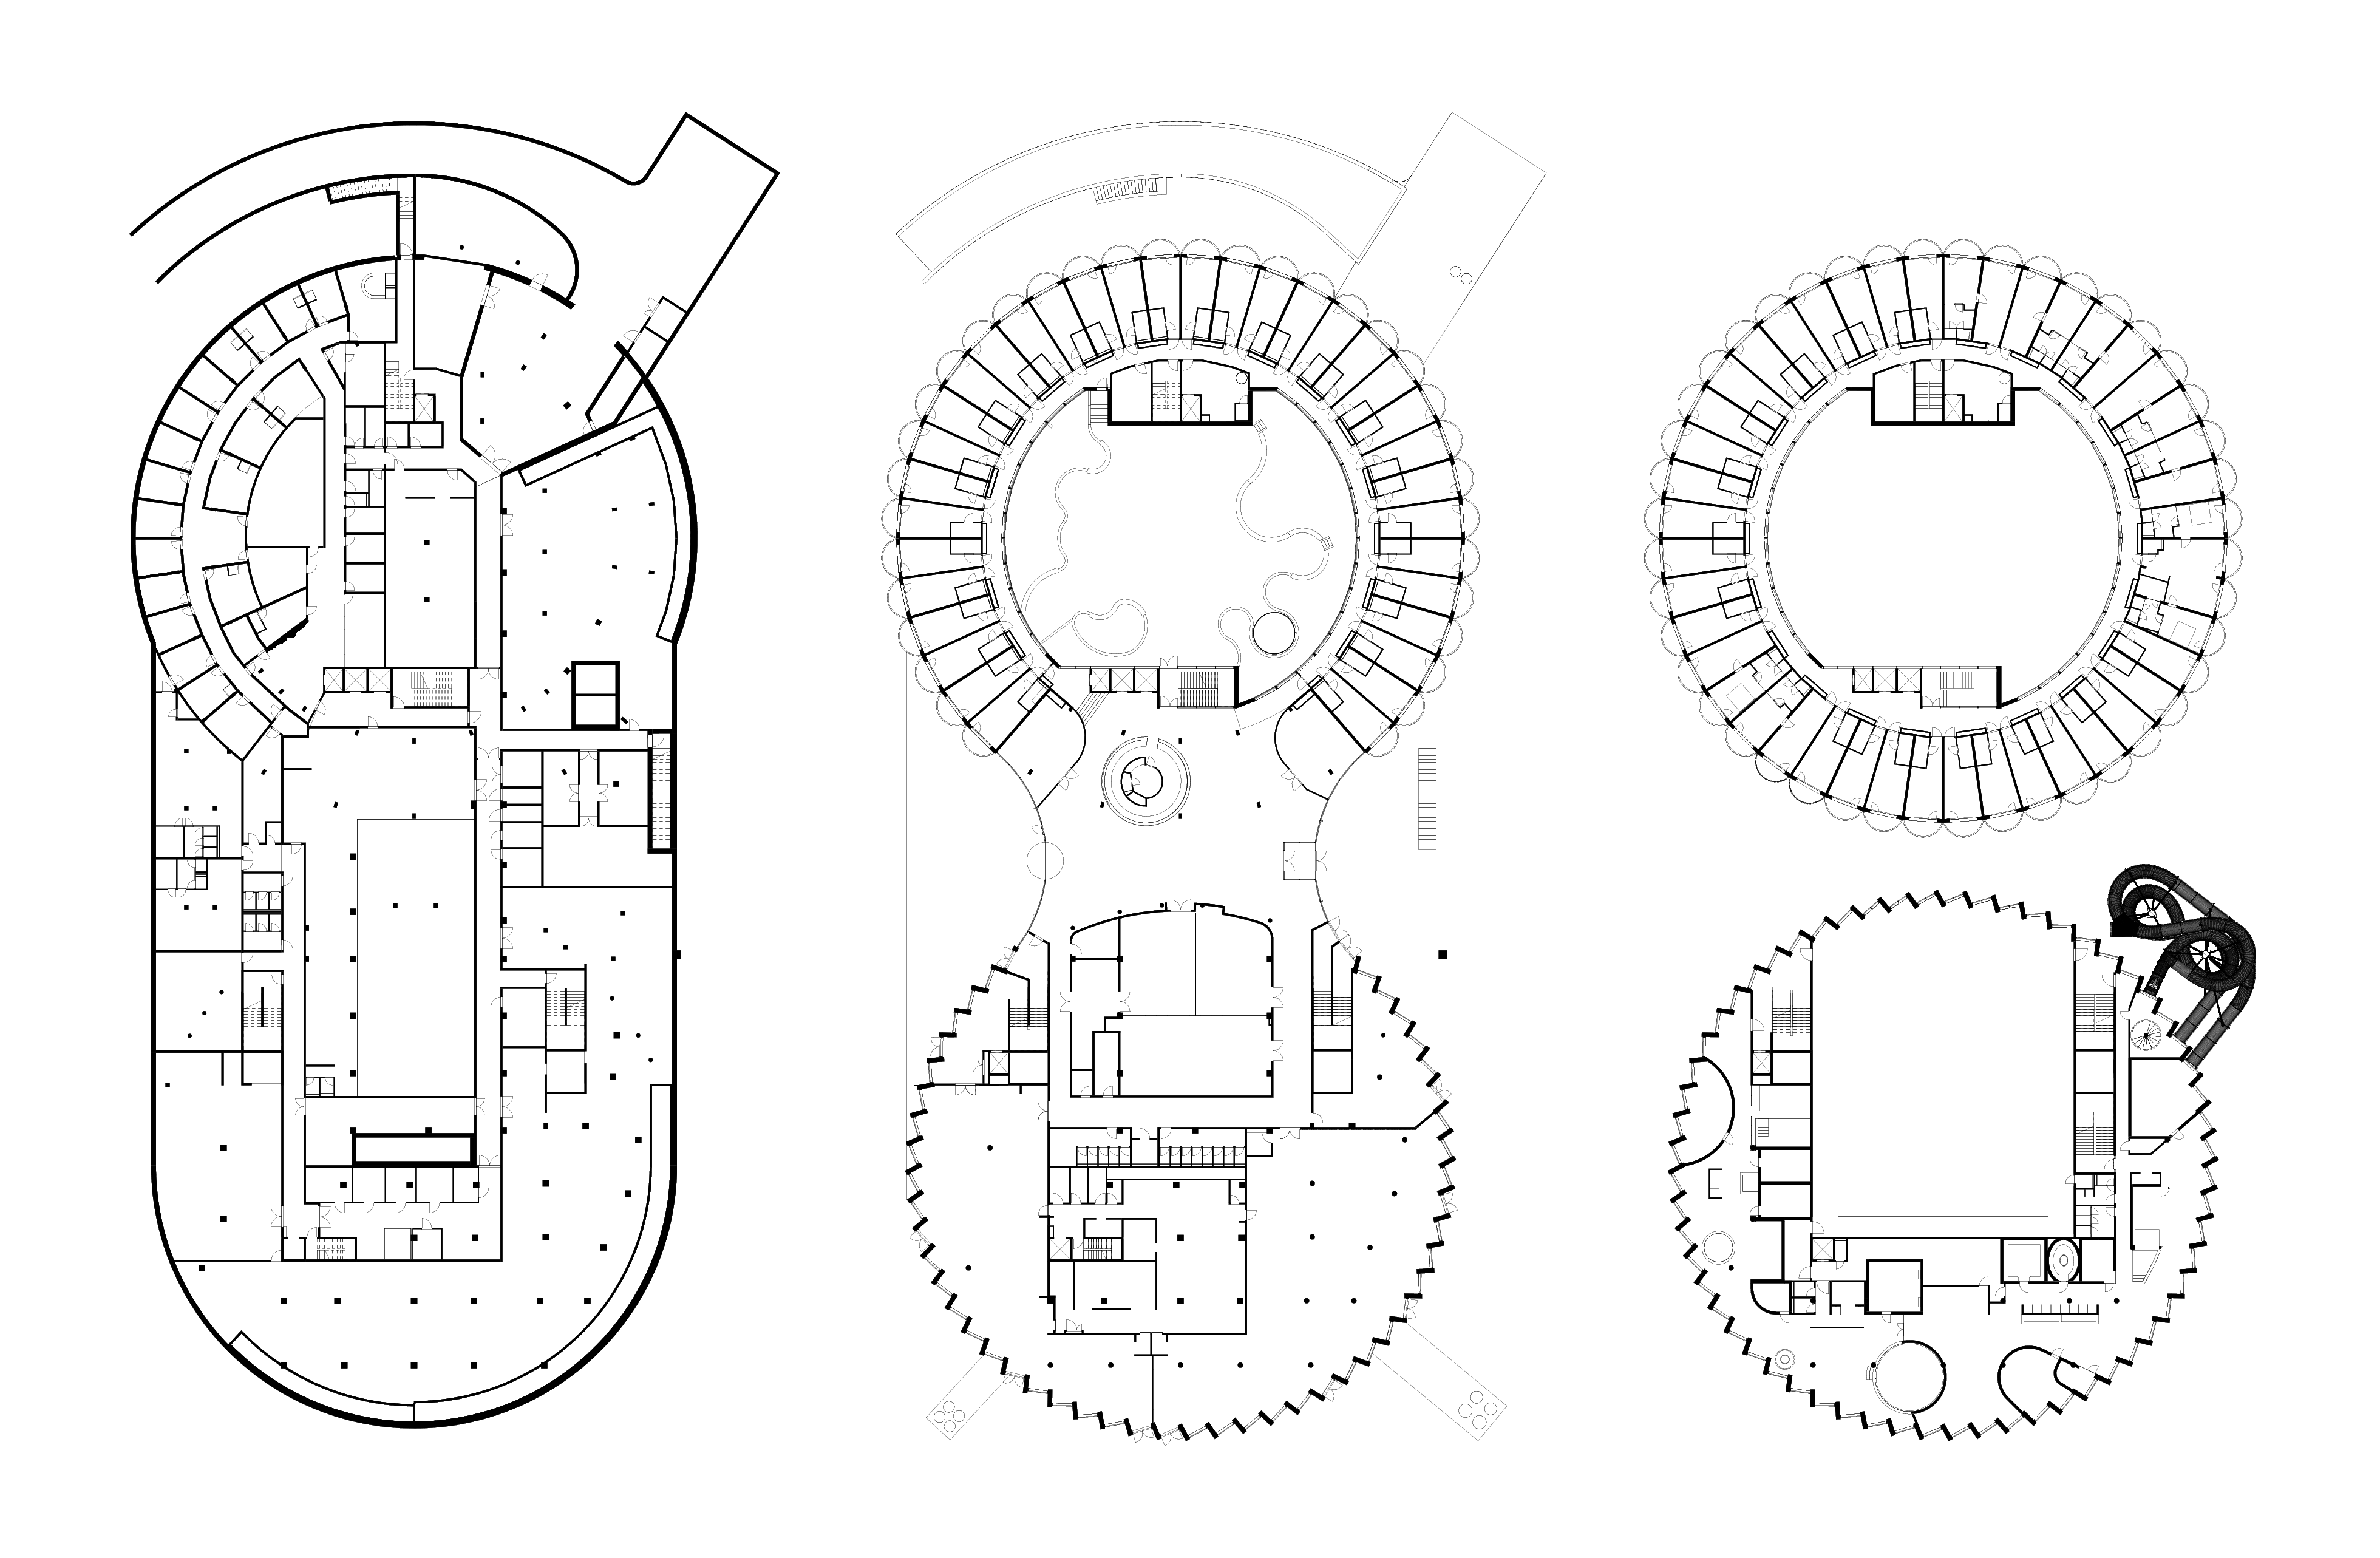 Ground, First and Second floor plans